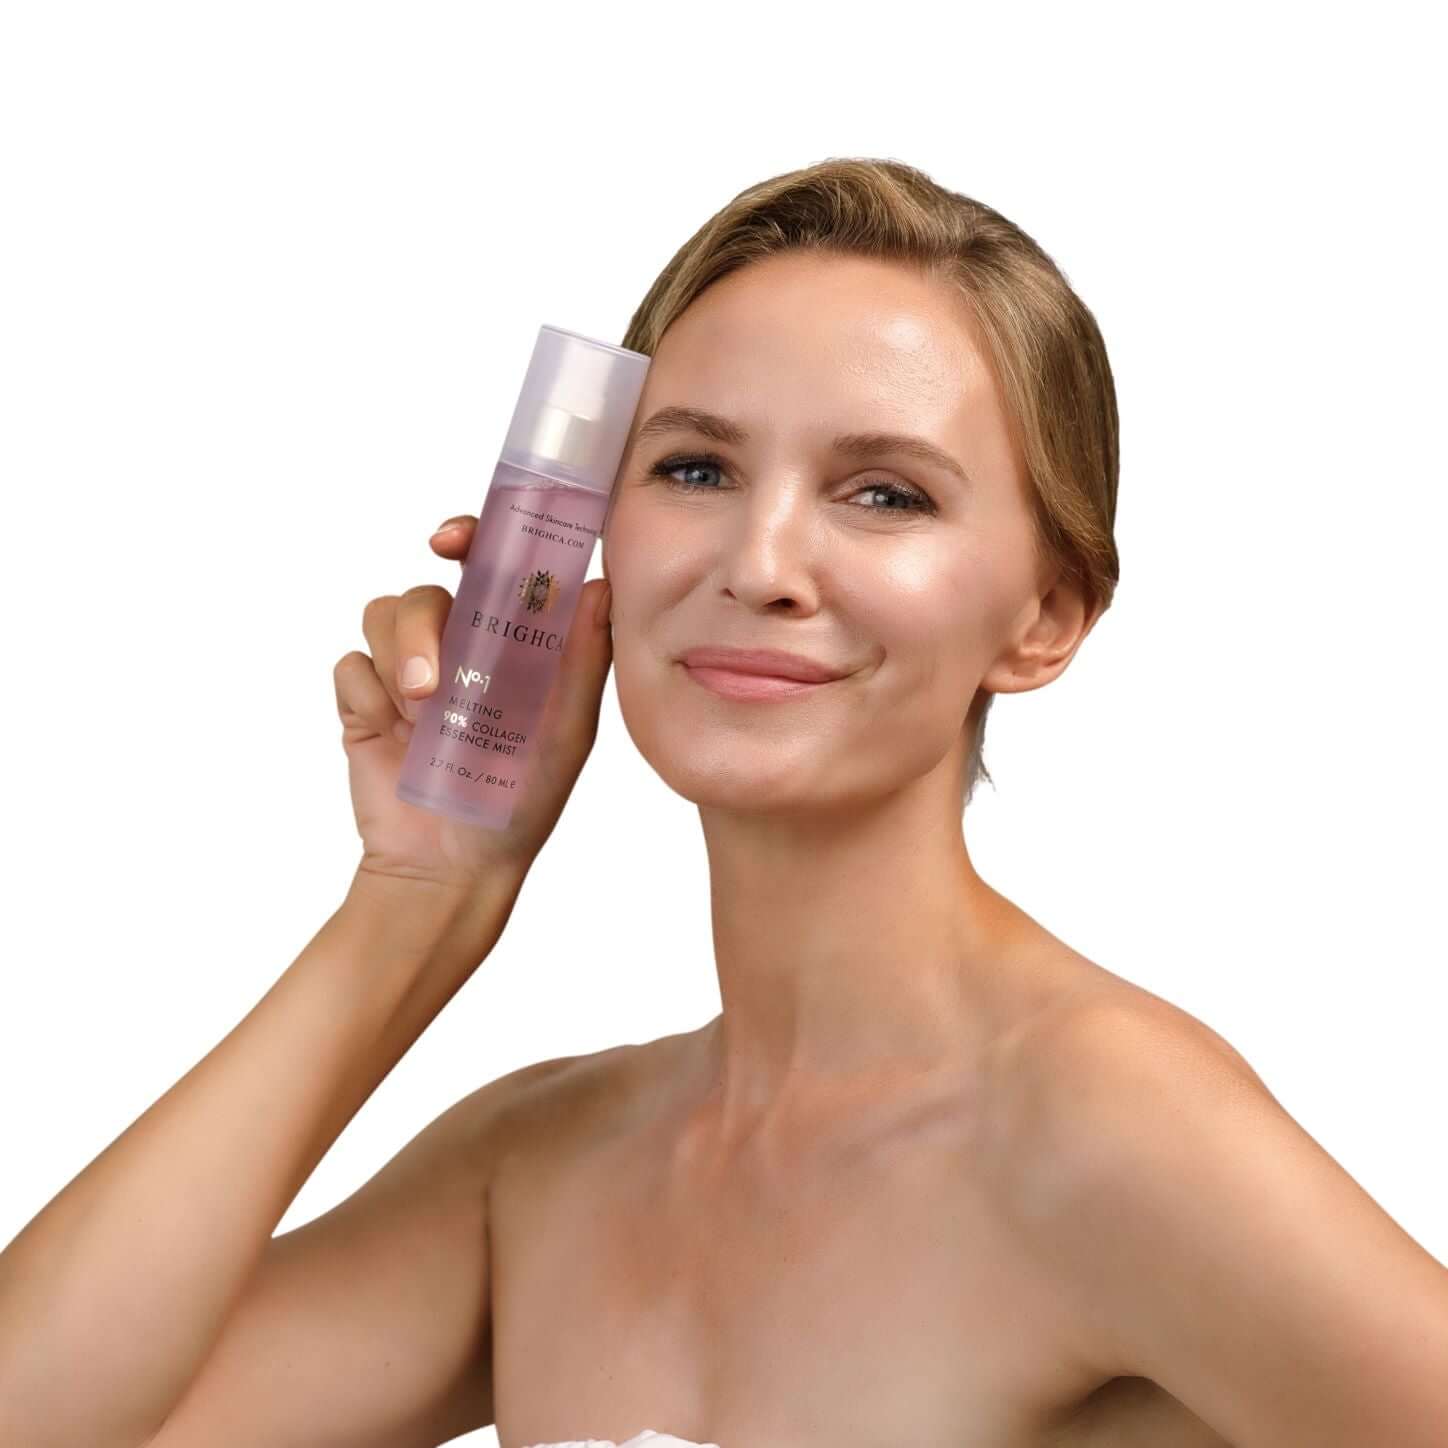 Woman Posing with Collagen Mist Packaging